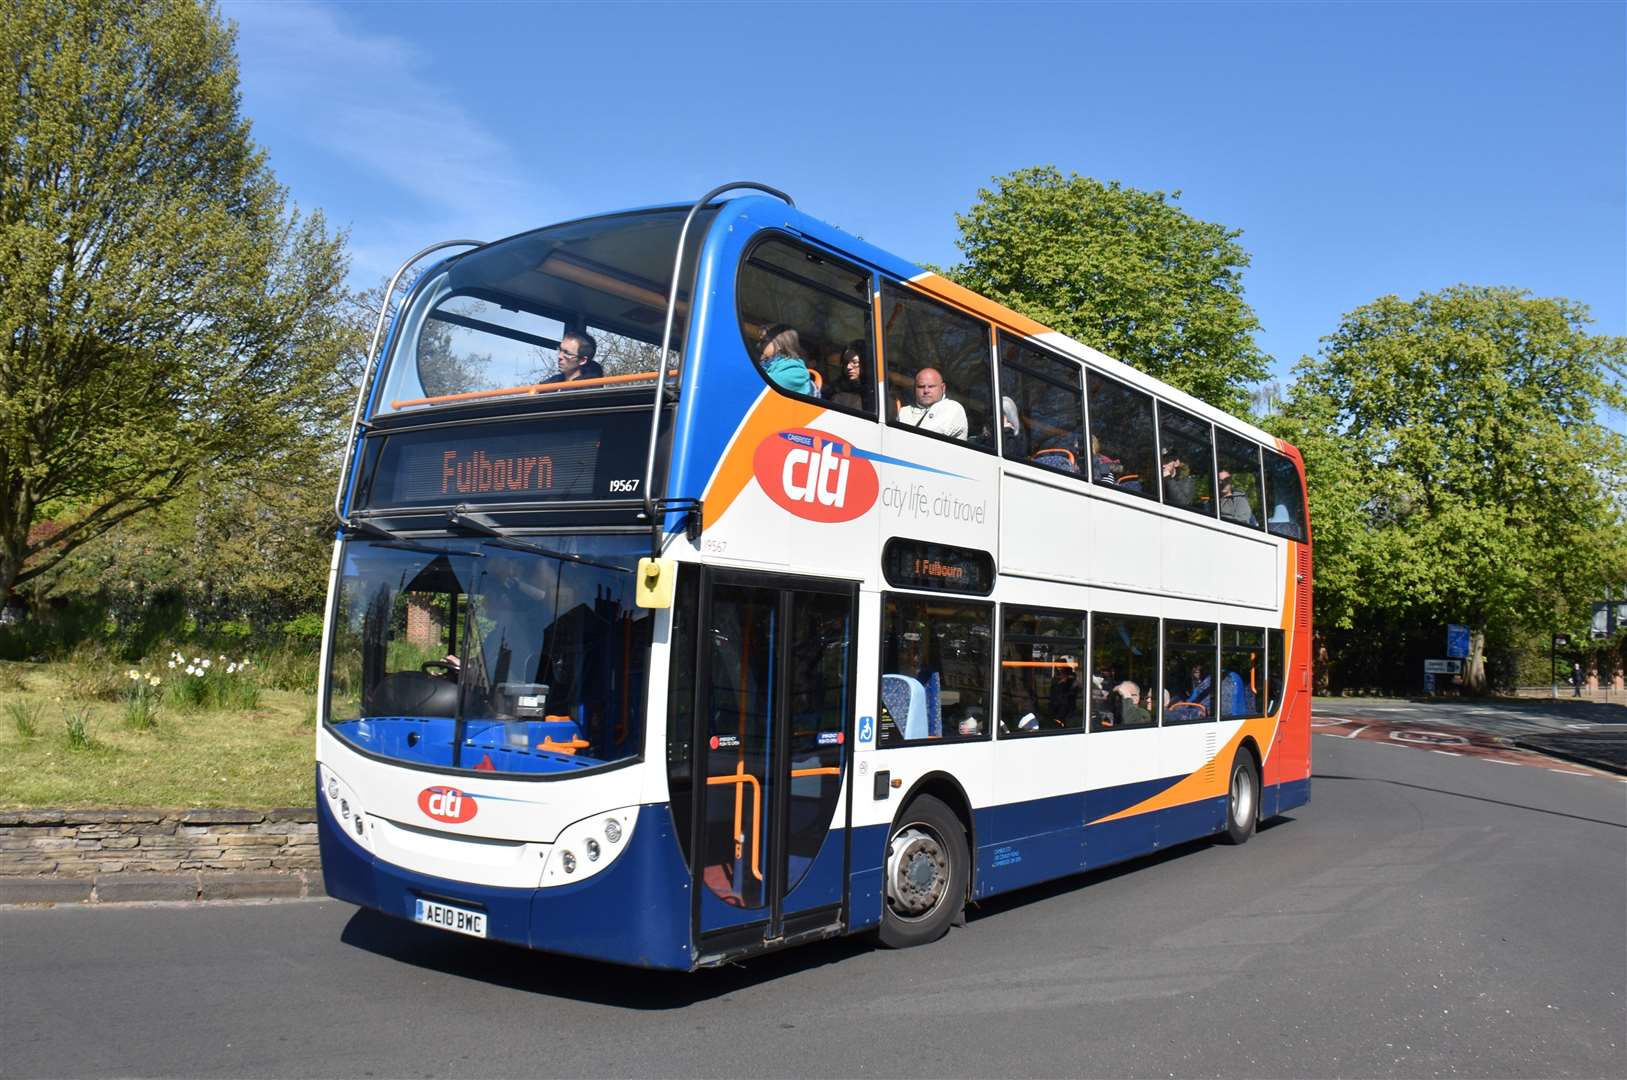 Stagecoach has had to reduce the number of passengers allowed on the buses